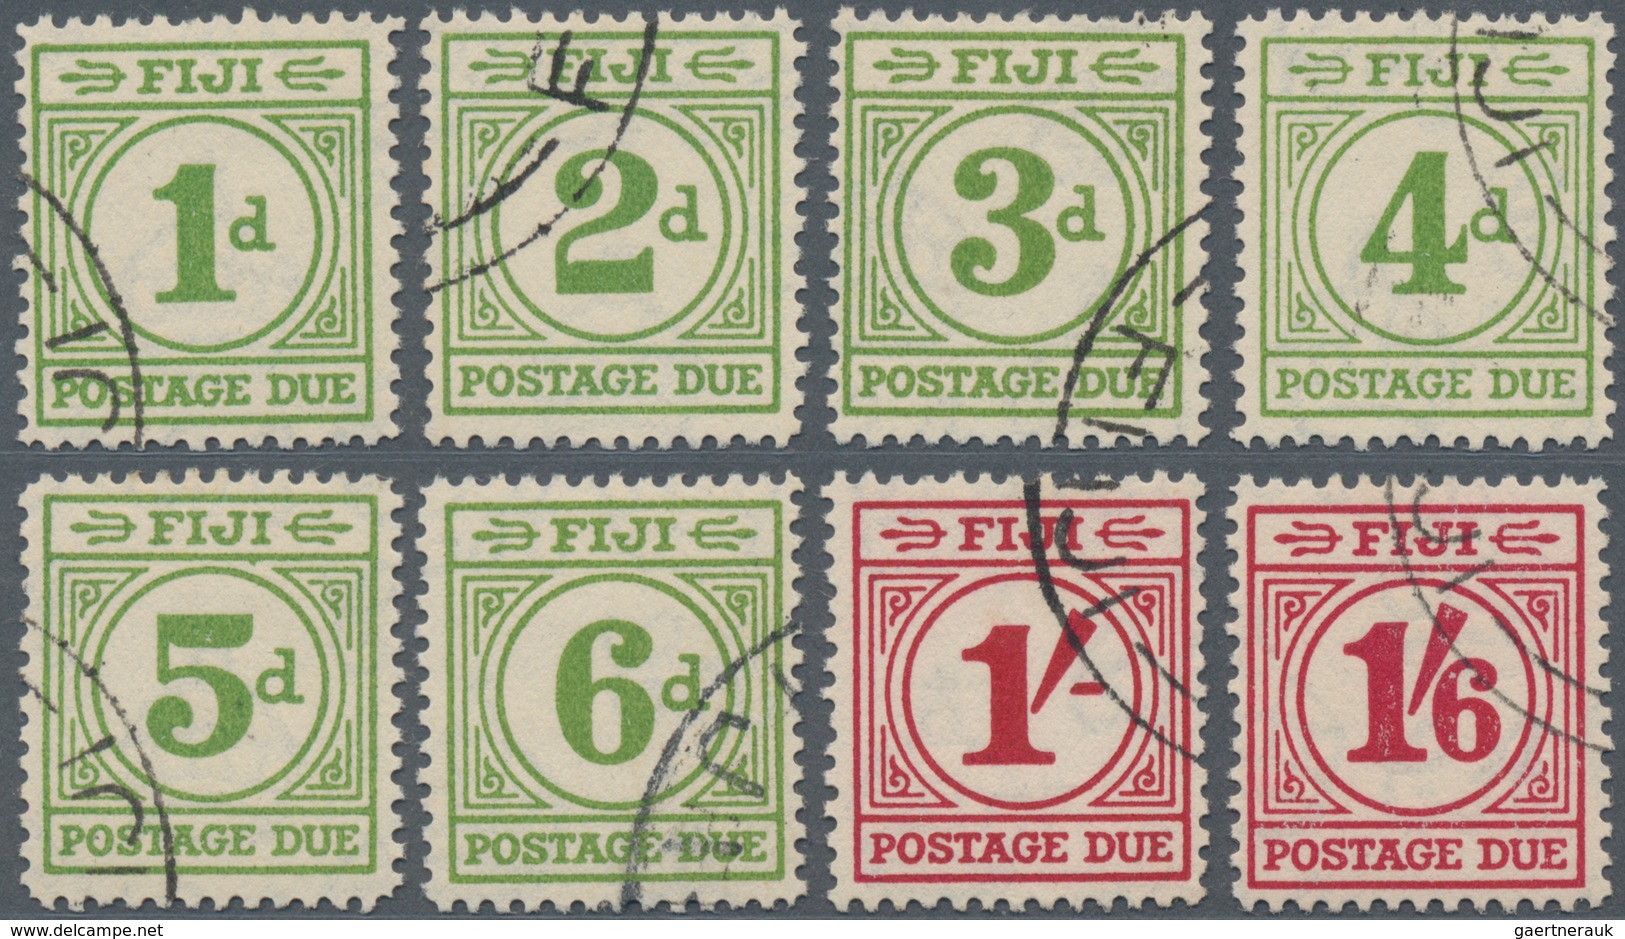 Fiji-Inseln - Portomarken: 1940 Complete Set Of 8 Postage Dues Up To 1s6d., Cancelled By Part FIJI C - Fiji (1970-...)